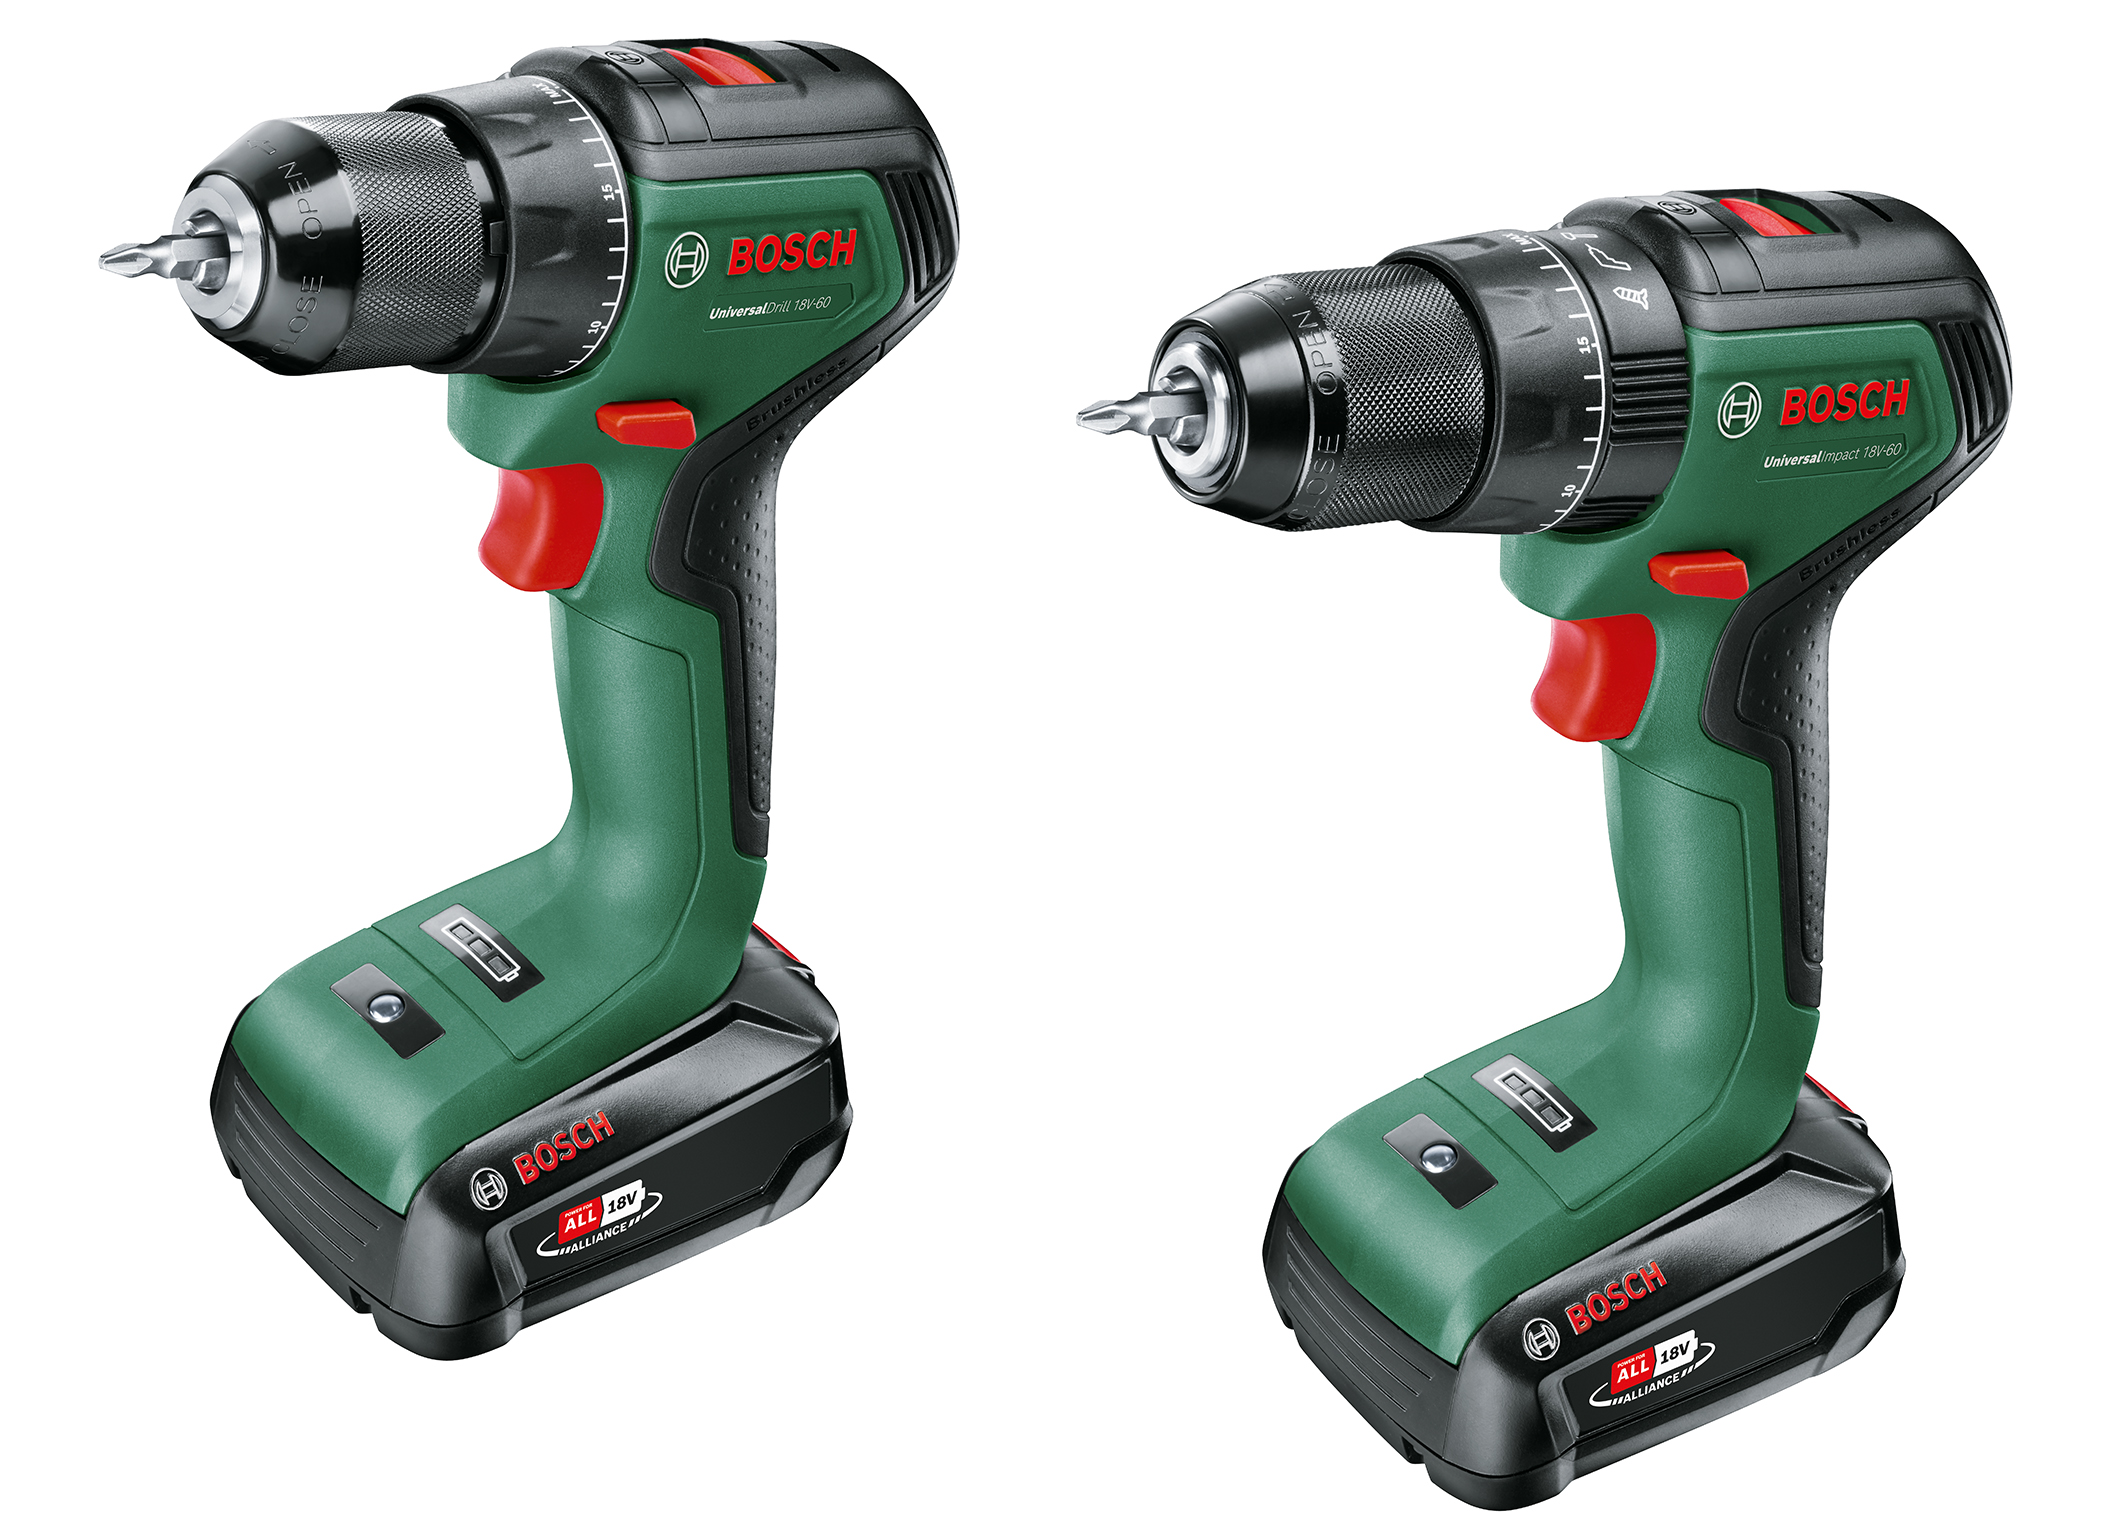 Powerful and durable: Bosch UniversalDrill 18V-60 and UniversalImpact 18V-60 for home and garden